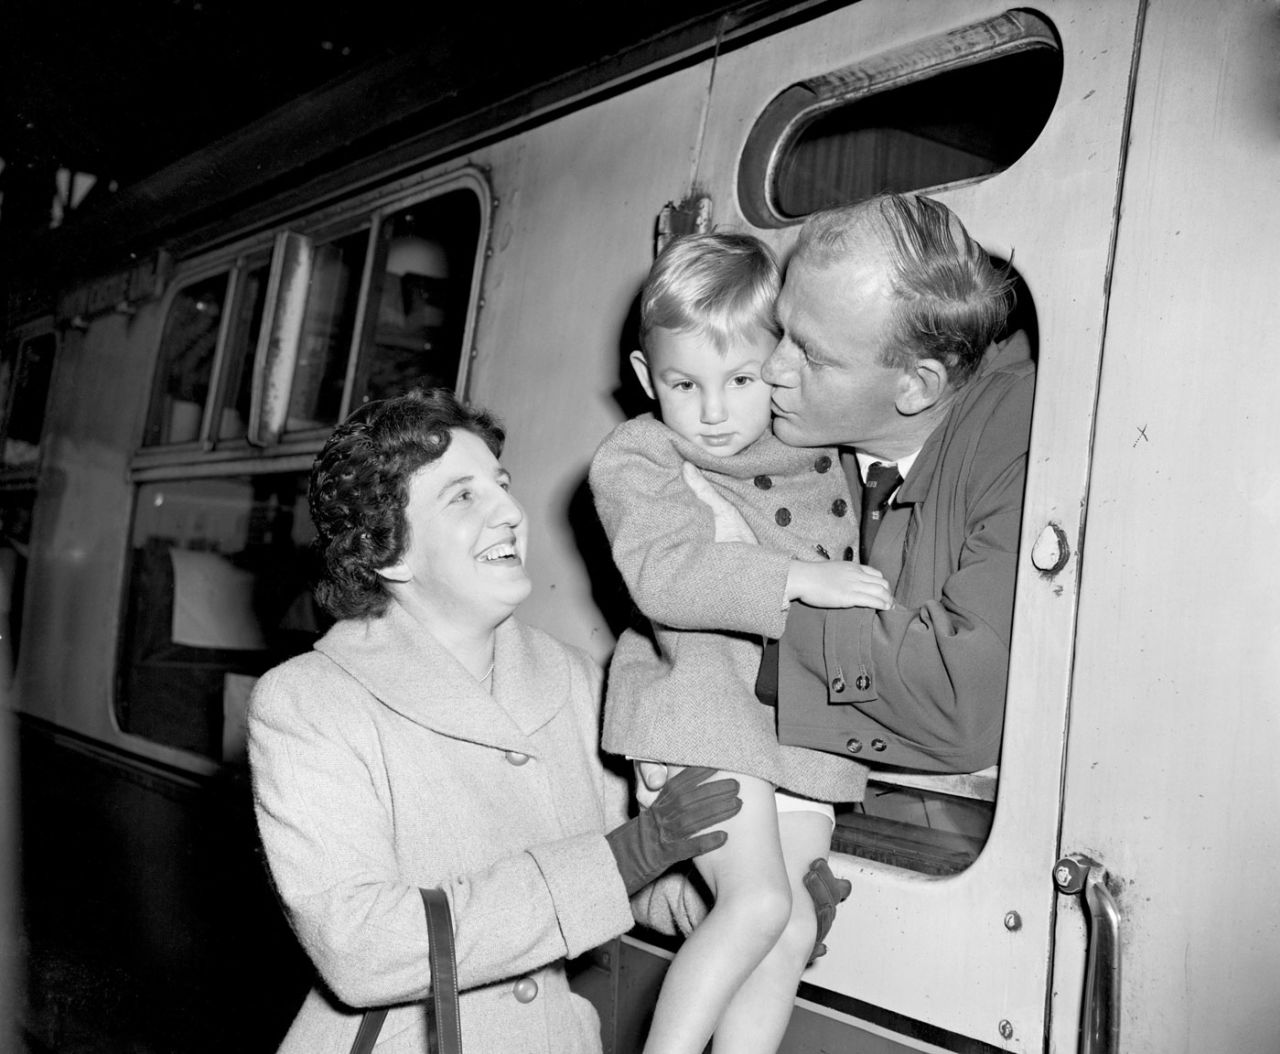 Tony Lock kisses his son goodbye at Waterloo Station before leaving for England's tour of South Africa, London, October 4, 1956